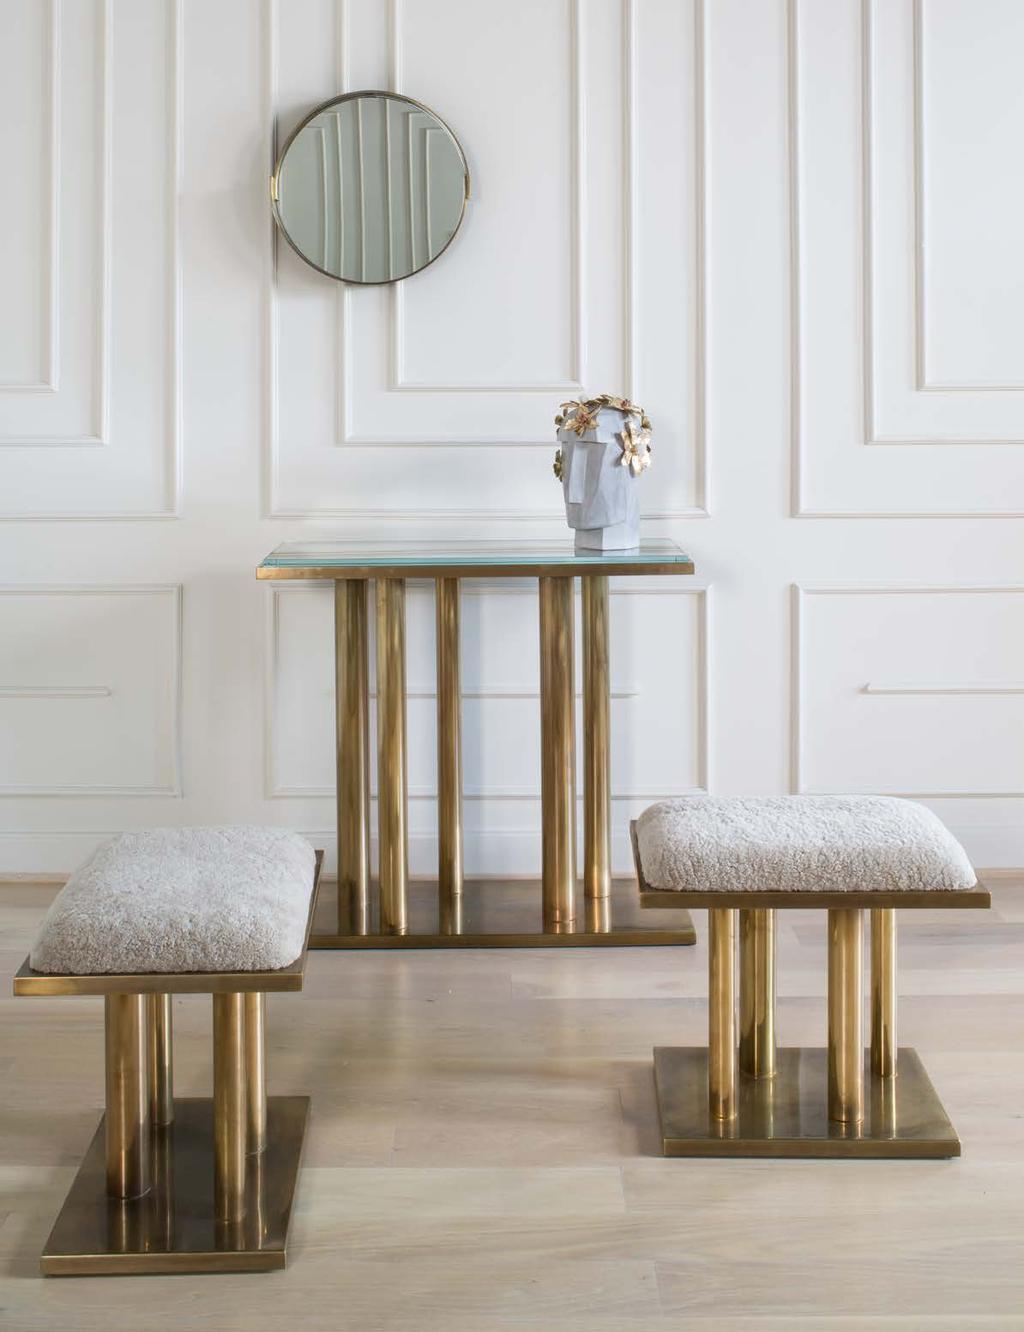 THE COLLECTION KELLY WEARSTLER Global interior designer and tastemaker, Kelly Wearstler, is renowned for her signature brand of unexpected, bold and chic design.